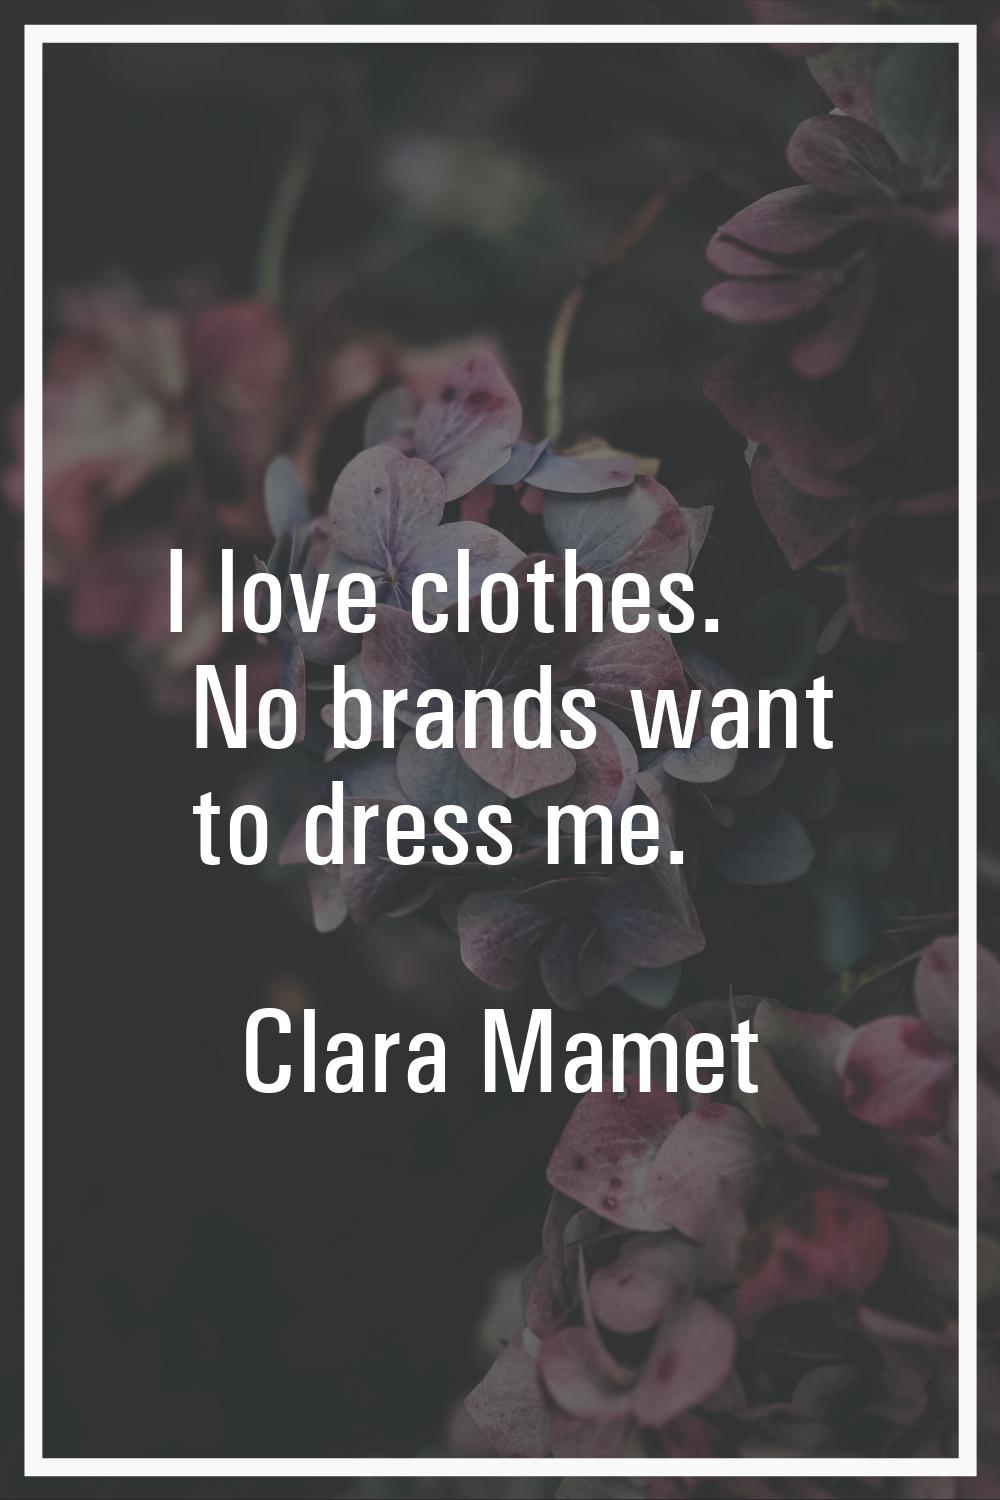 I love clothes. No brands want to dress me.